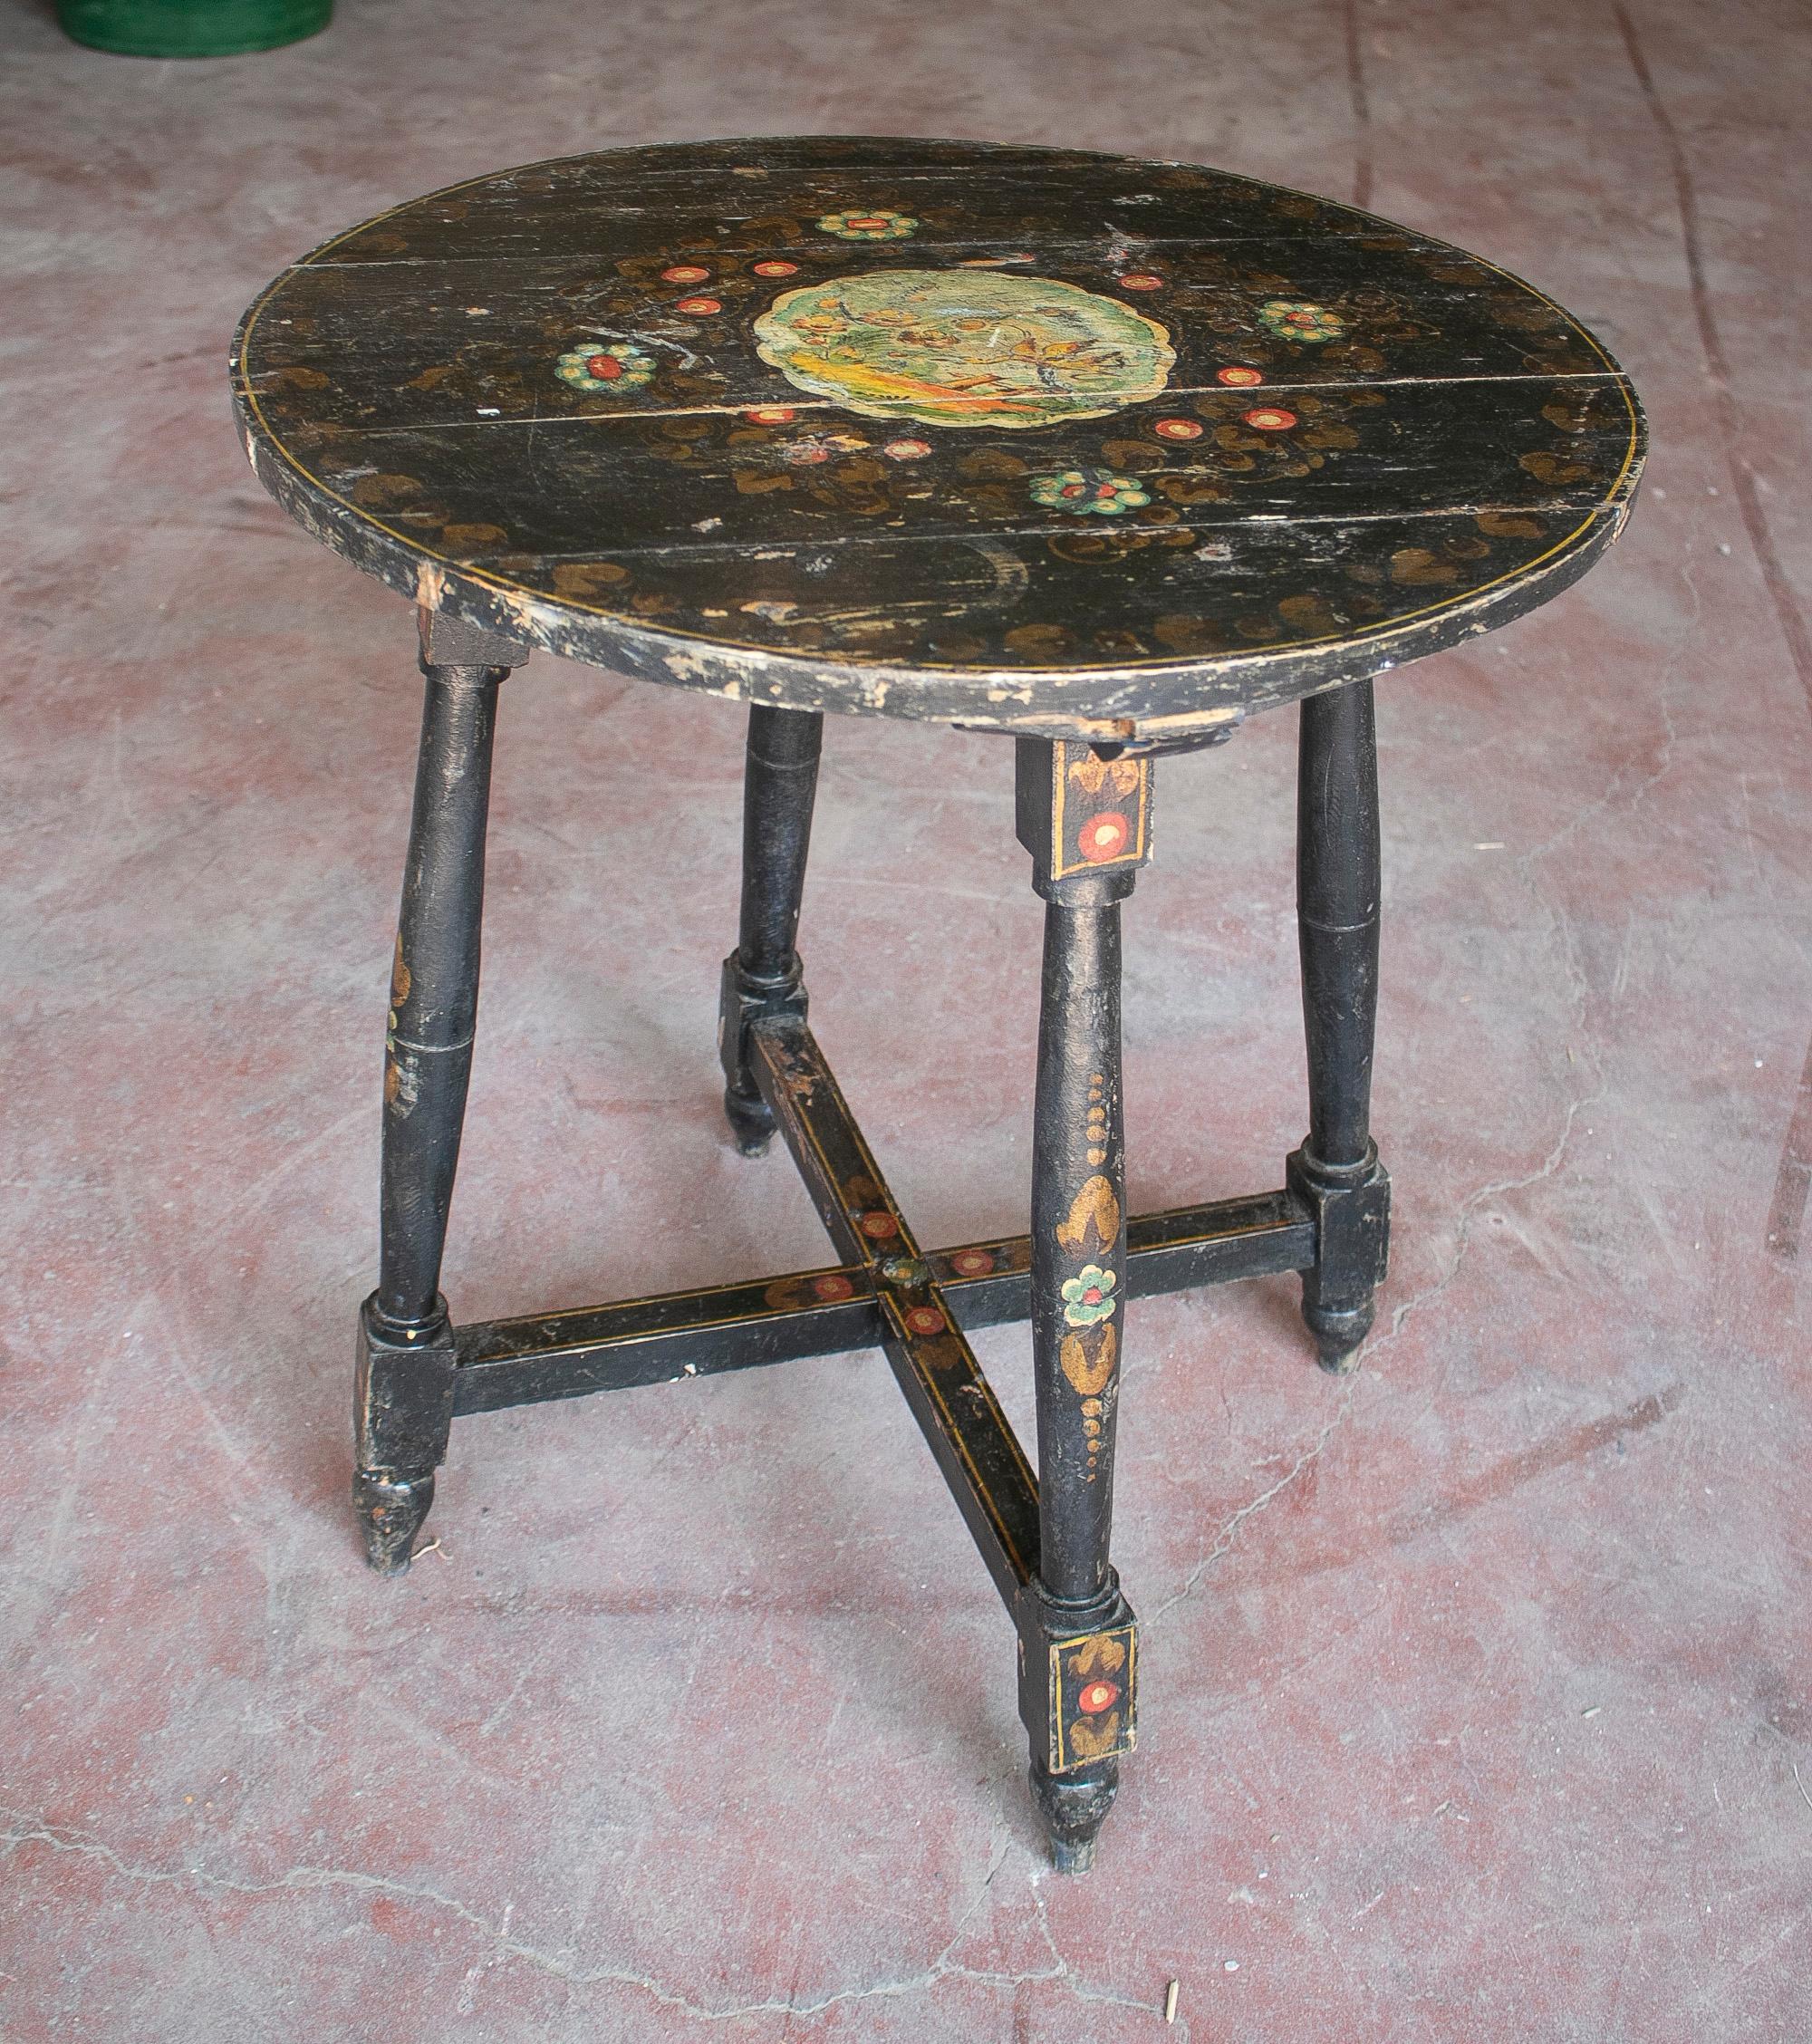 Rustic 1950s Spanish Andalusian hand painted black round table with plant motifs.